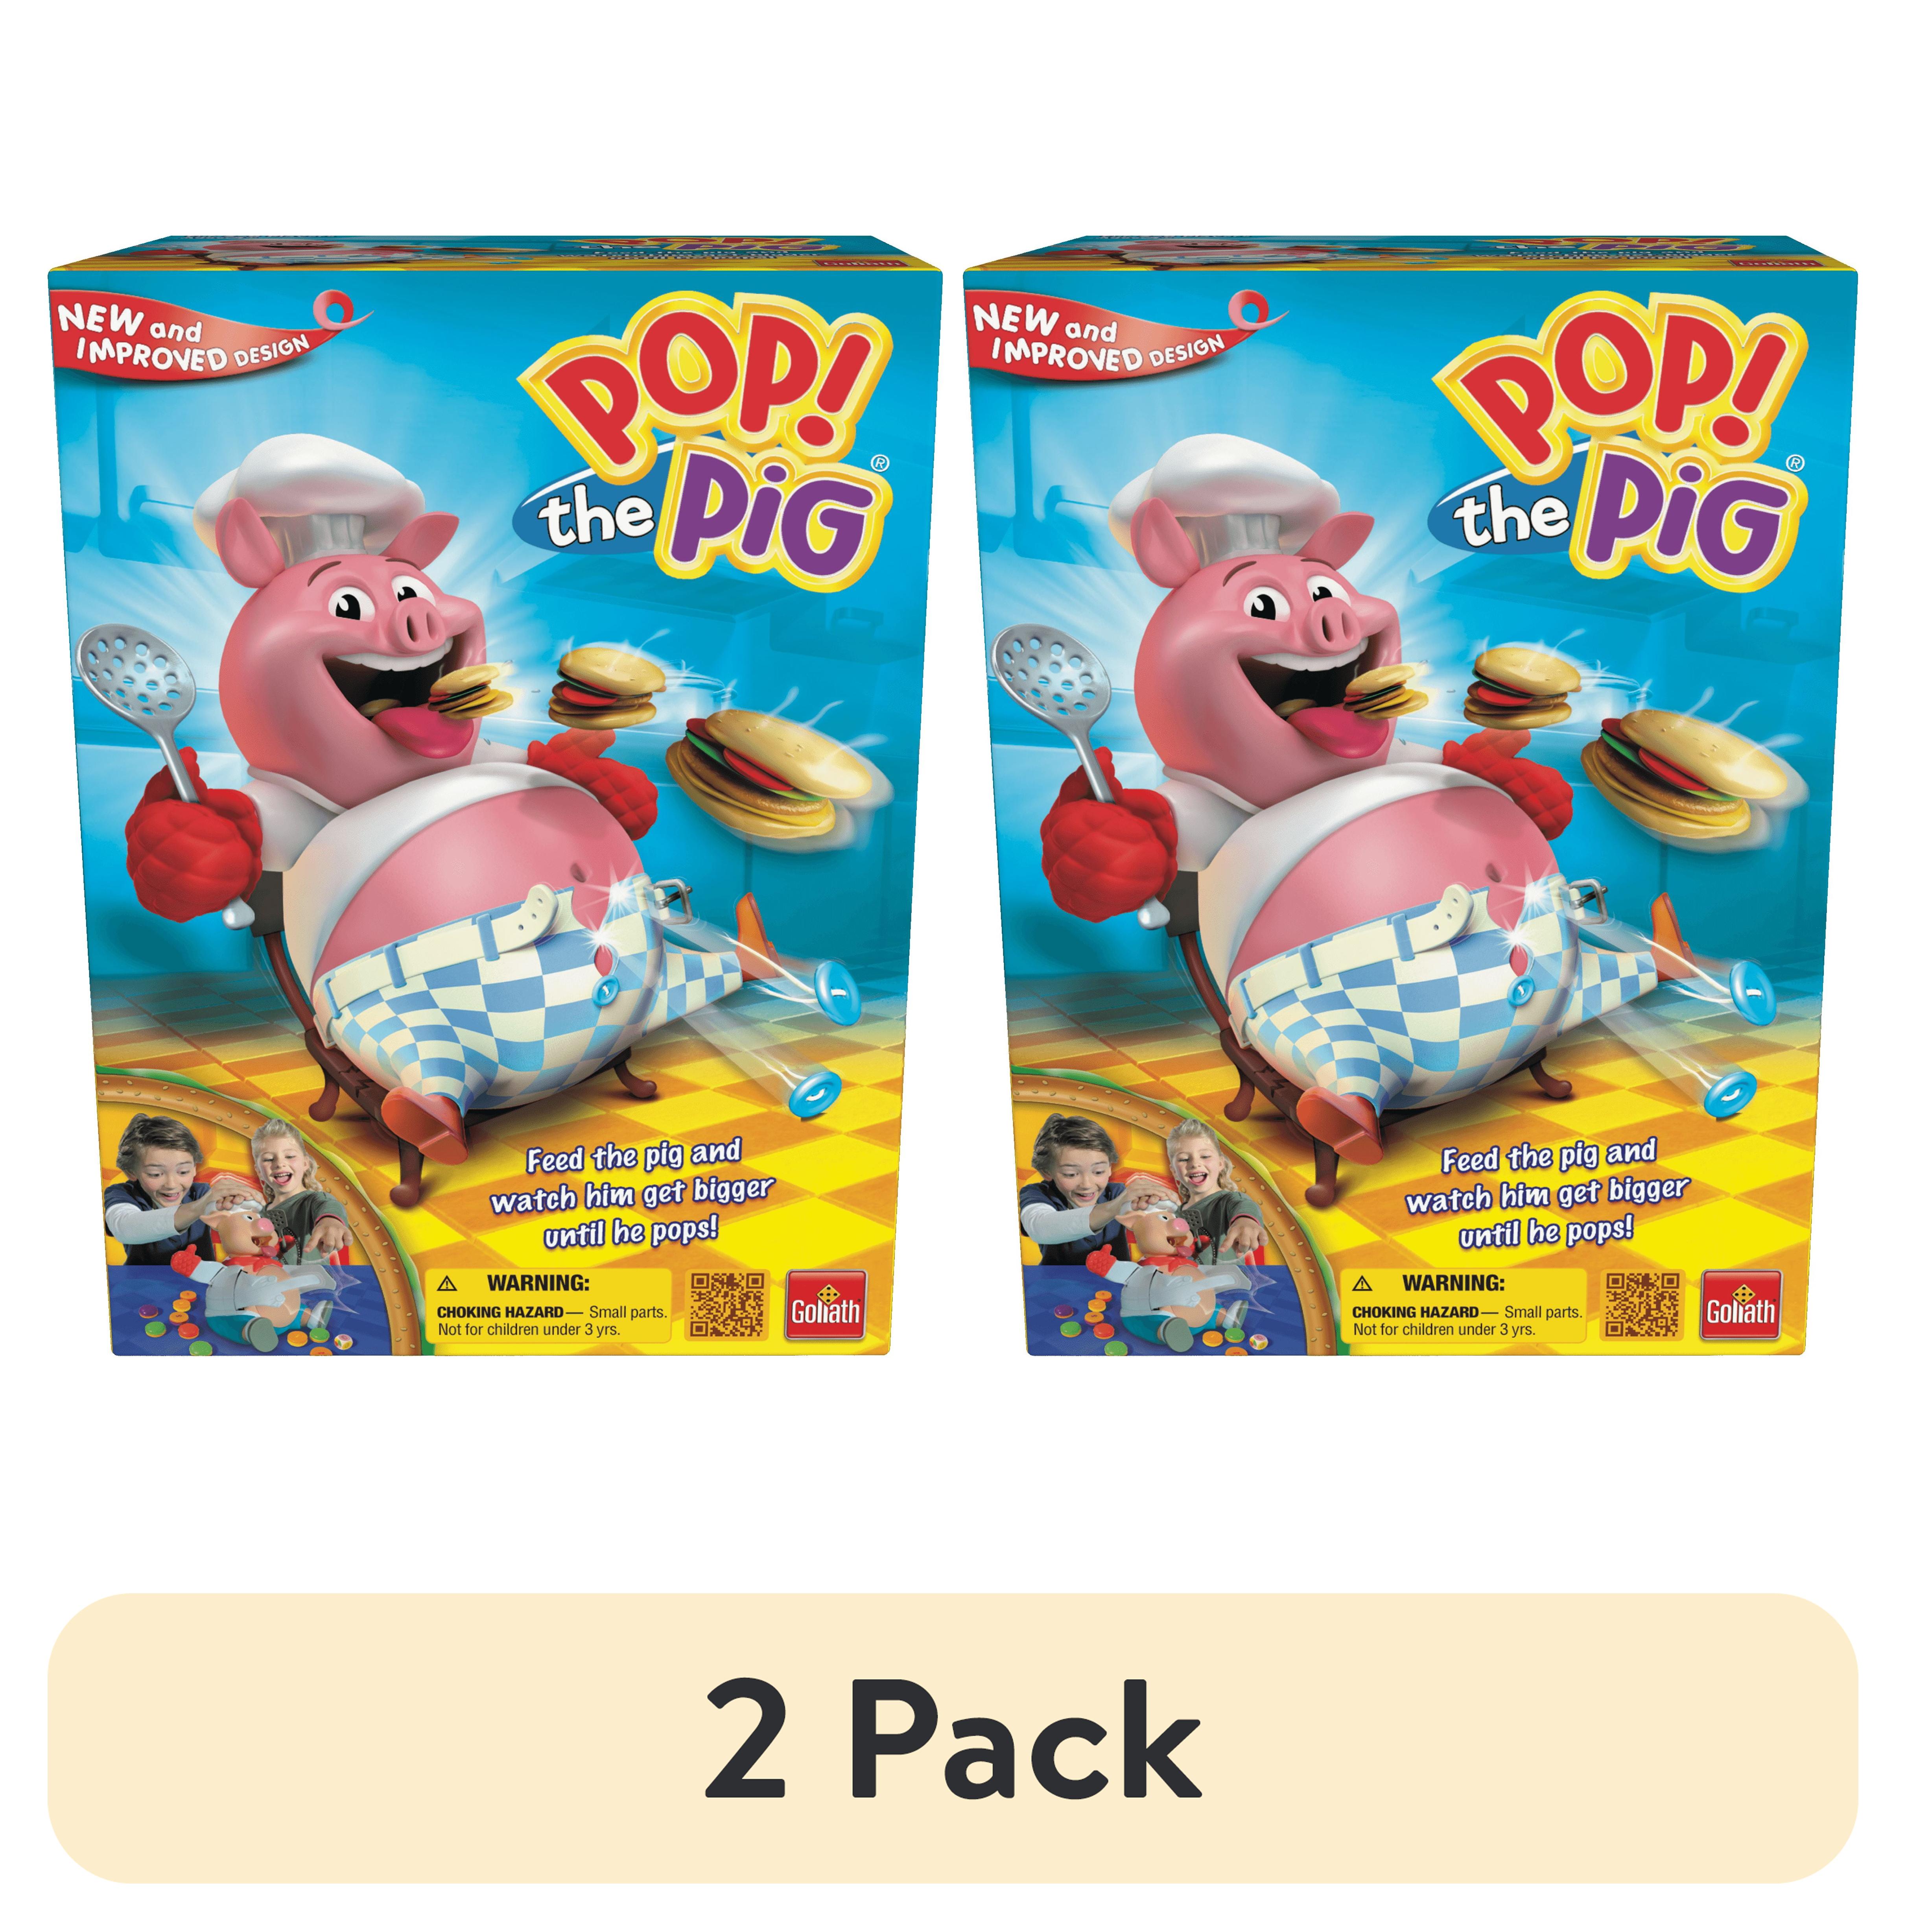 (2 pack) Goliath Pop the Pig Children's Game - Belly-Busting Fun, Feed Him Burgers, His Belly Grows - image 1 of 7